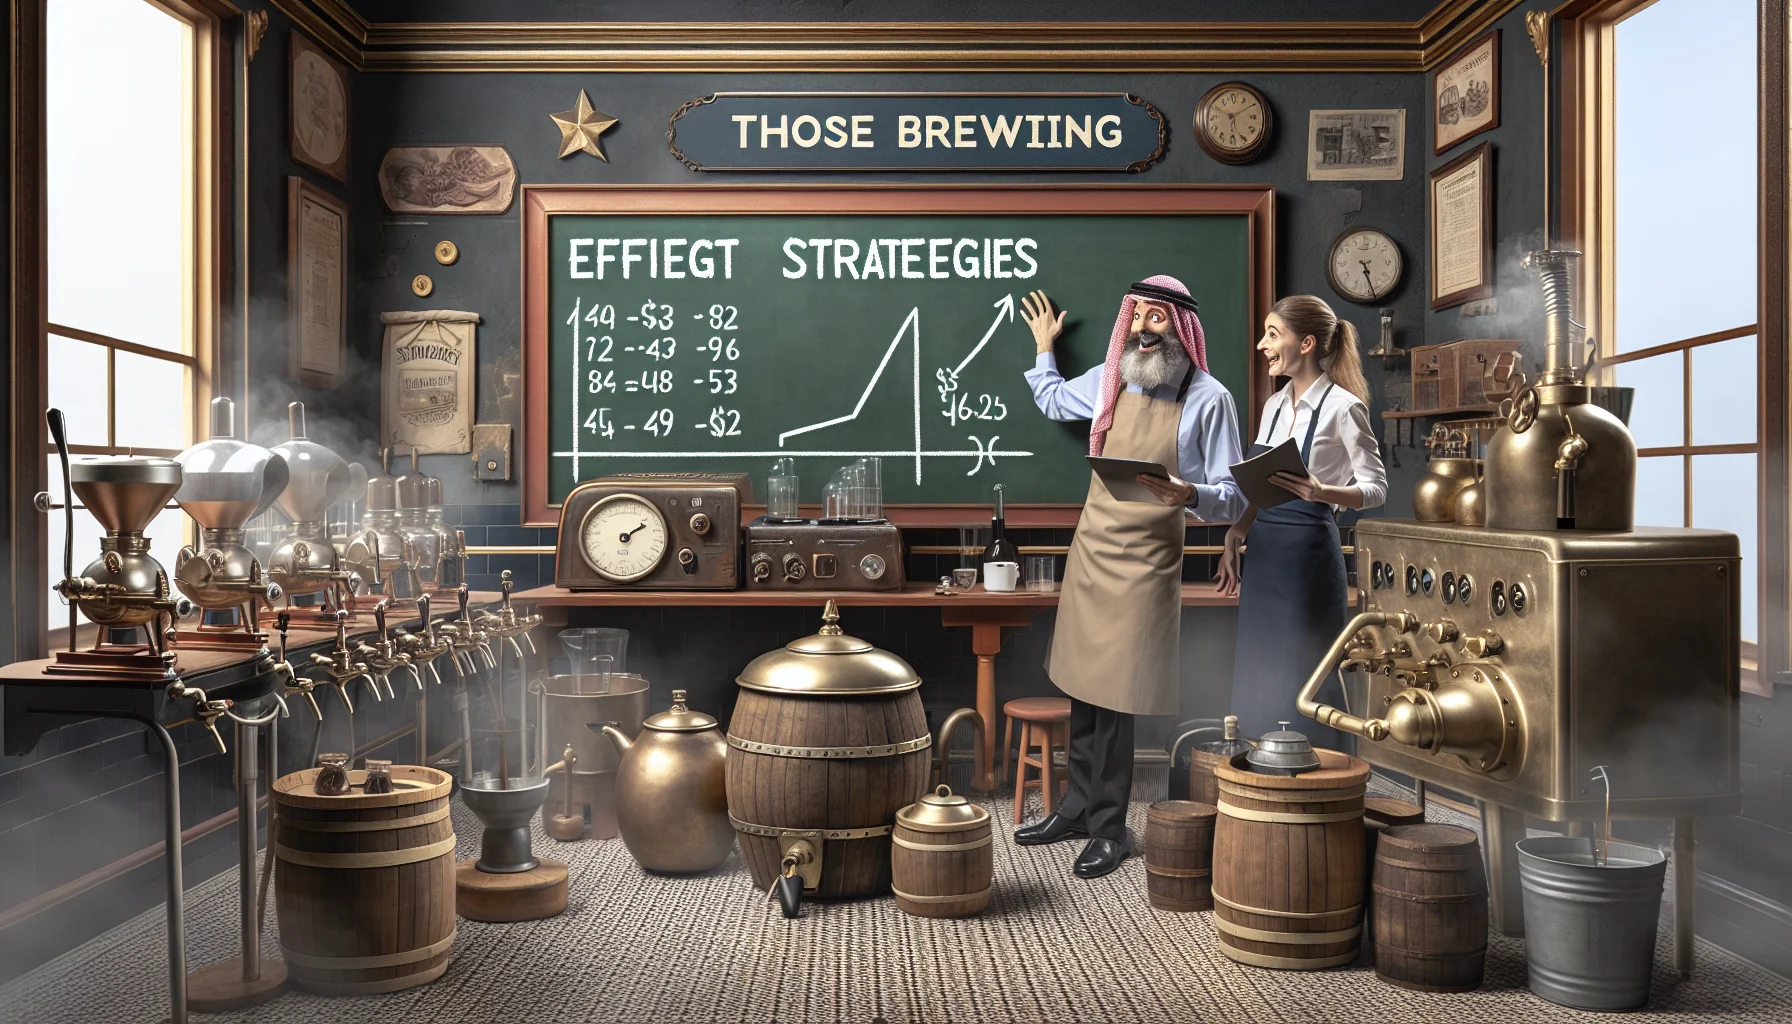 Create an image representing a humorous scene featuring efficient budget strategies for those brewing. The scenario takes place in a tea and coffee brewing facility, with projecting visuals of brewing equipment, a range of coffee and tea products, and brewing resources. The decor should be of mid-19th-century European style, and employees in the scene comprise of a Middle Eastern male brewmaster instructing a Caucasian female apprentice on budget-saving techniques, both with expressions of surprise and laughter at a huge calculation error on the chalkboard. This prompts for a realistic touch to the image.